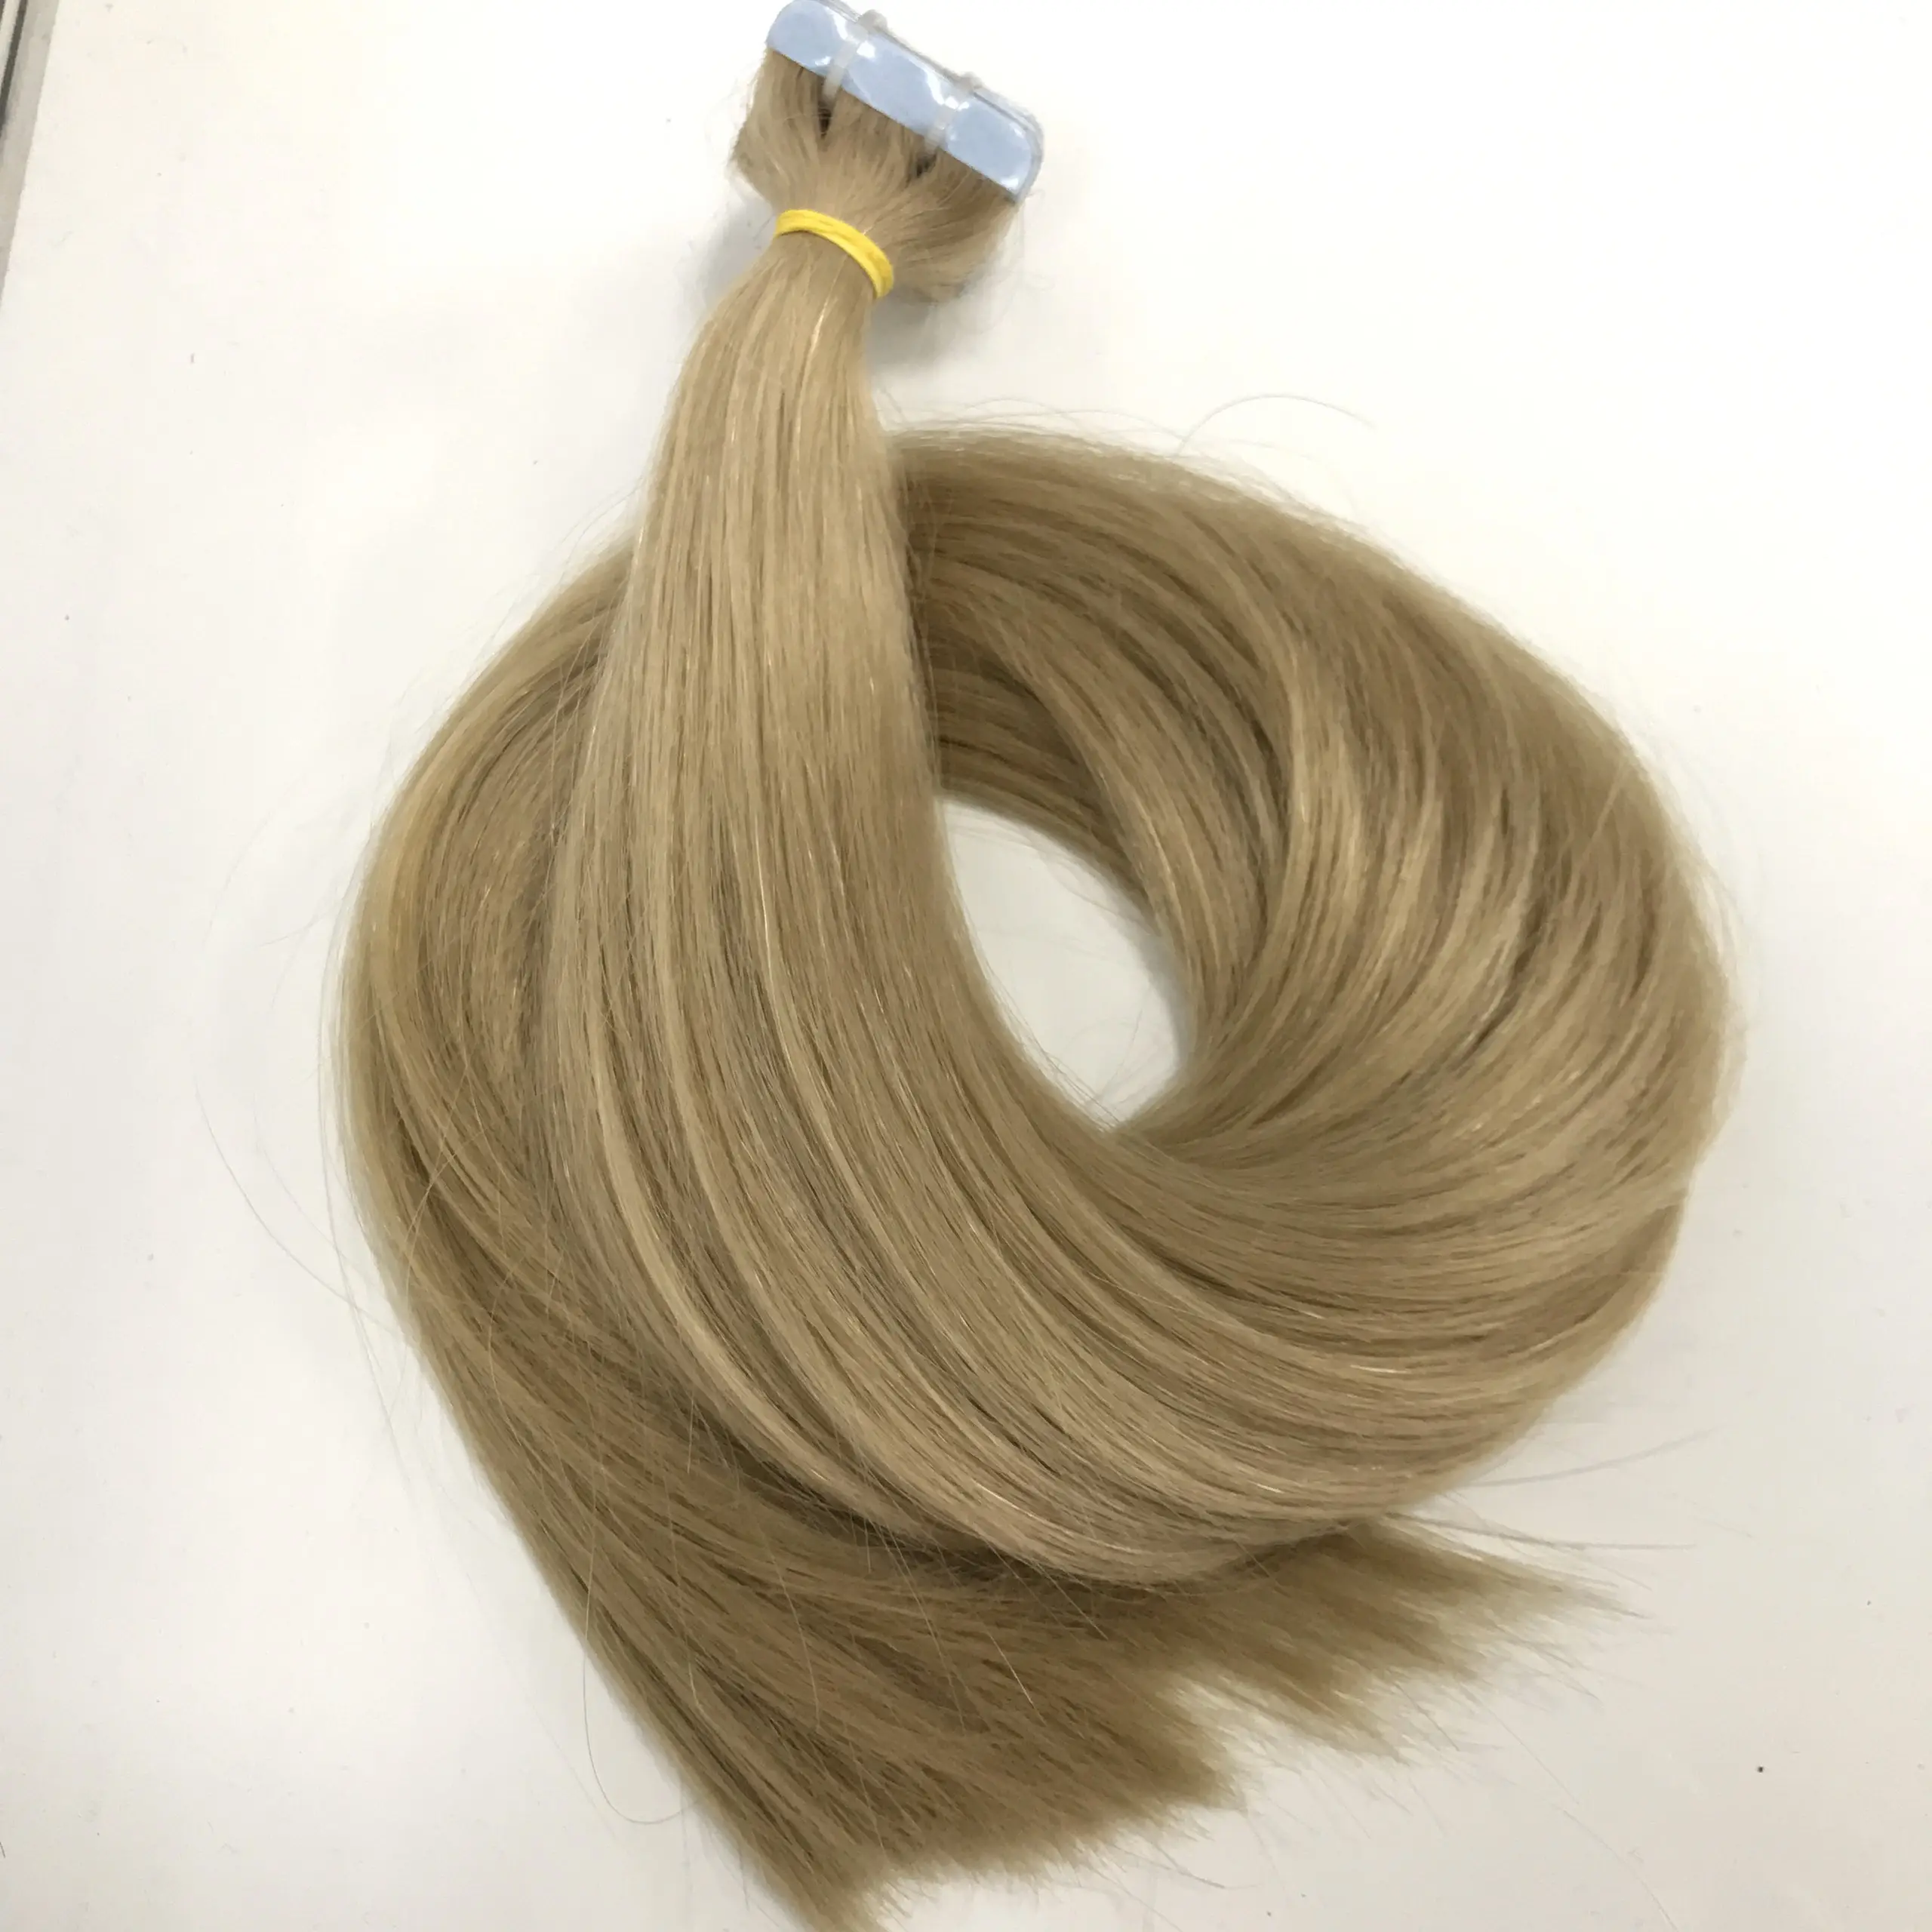 Luxury Straight Vietnamese Hair Tape In Extension Super double drawn hair types Bonde hair hot sale texture